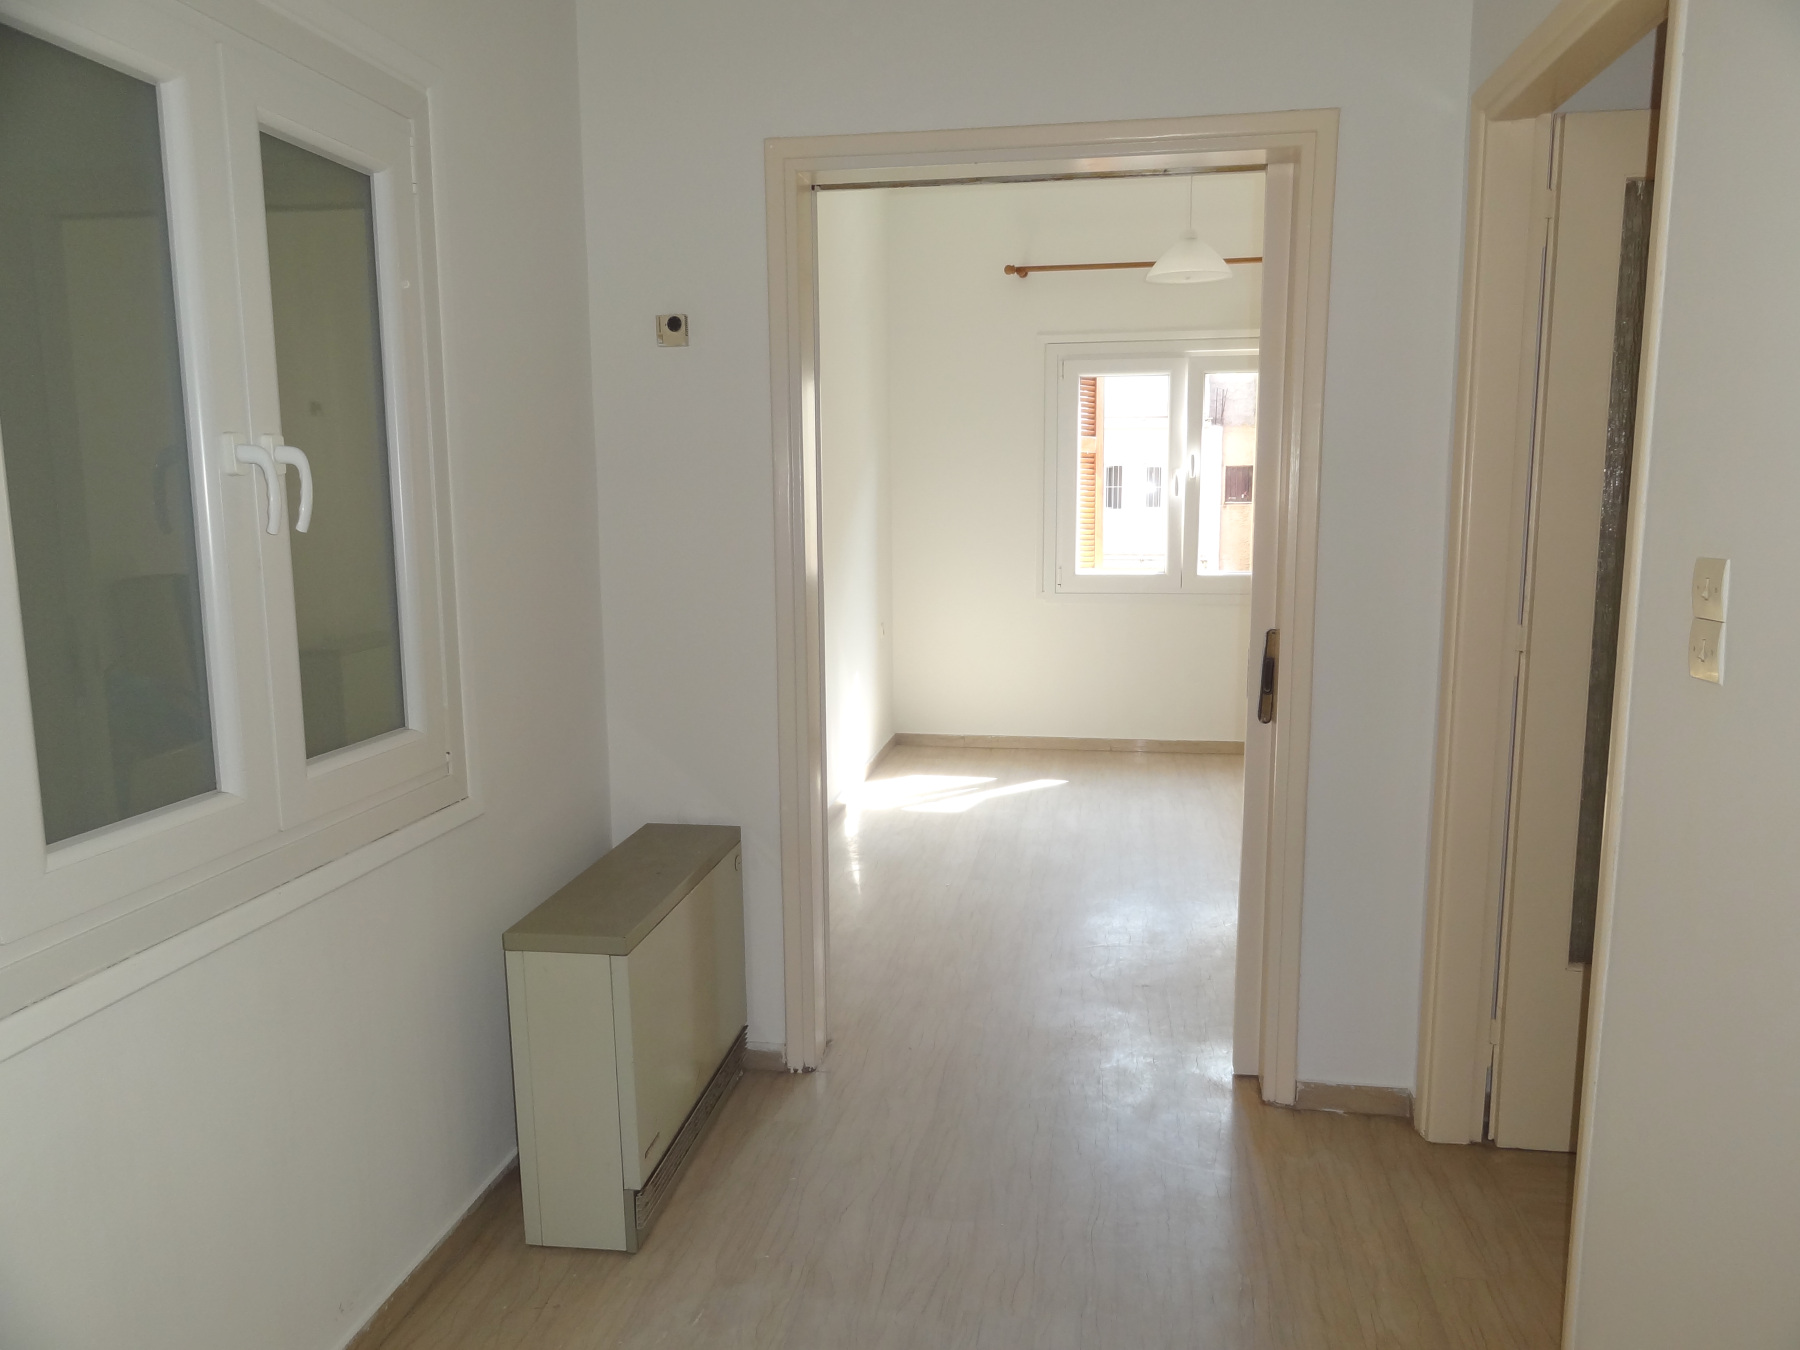 Renovated 1 bedroom apartment for rent, 48 sq.m. 2nd floor in Homer square in Ioannina